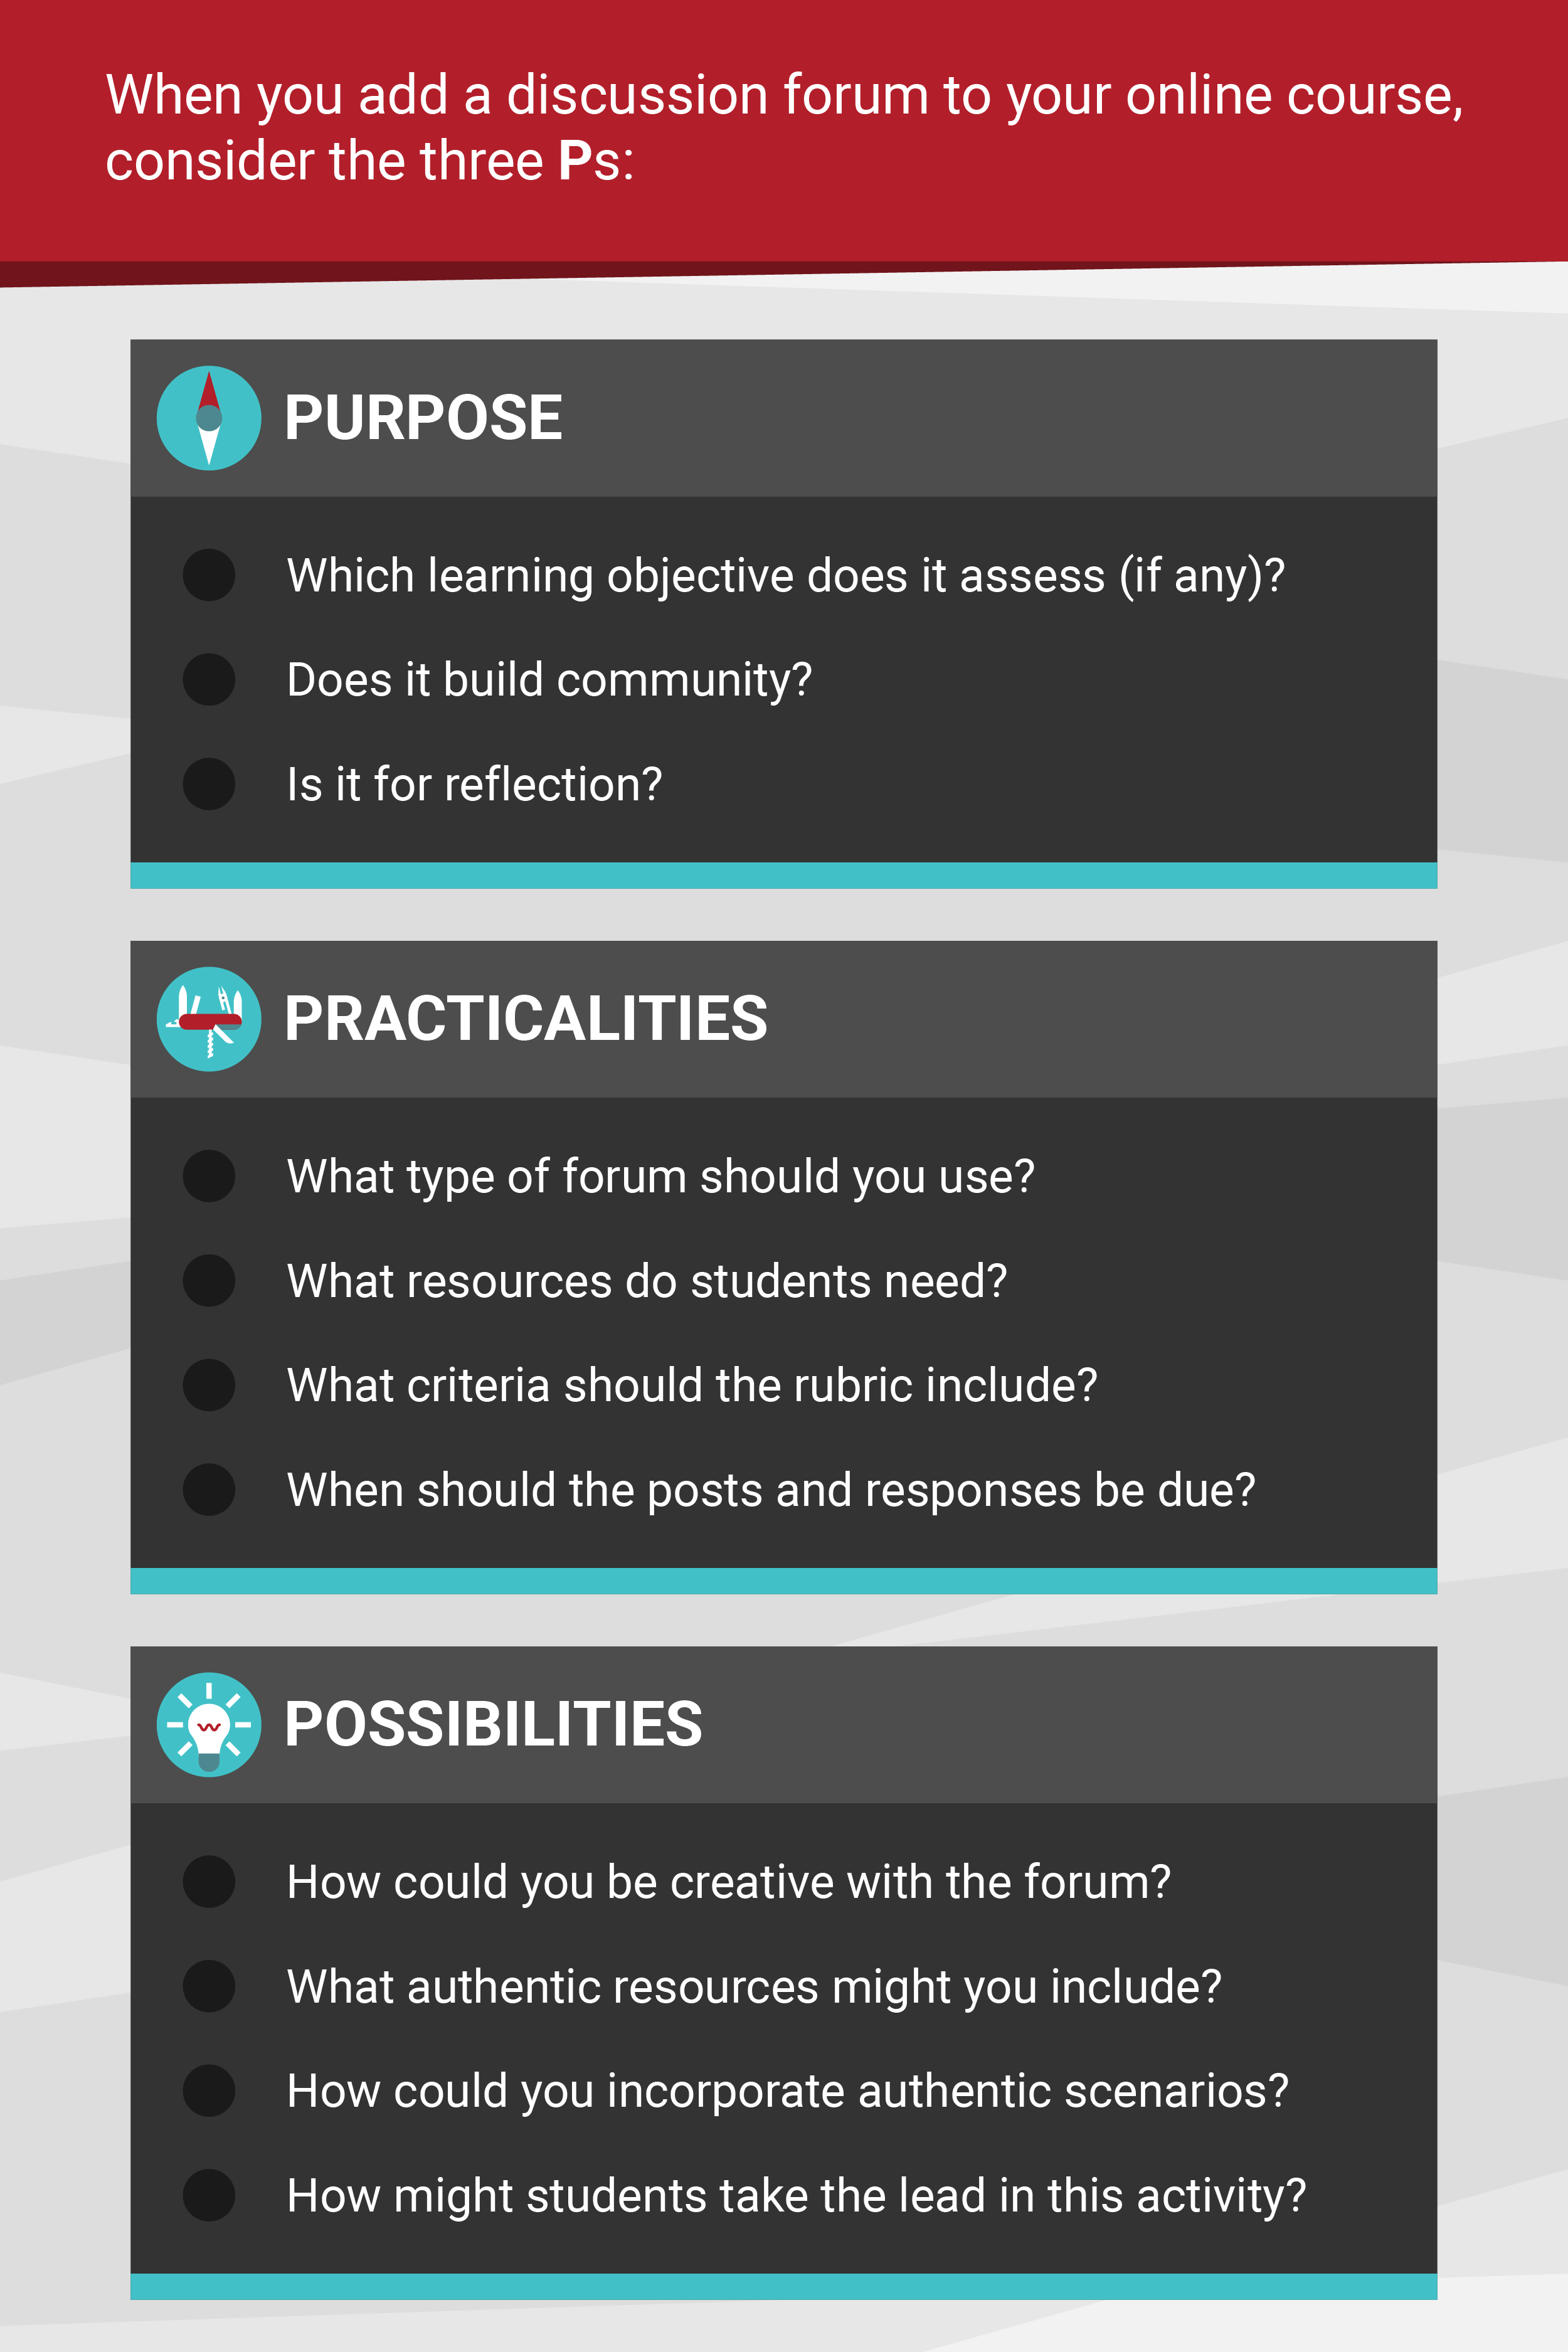 When you add a discussion forum to your online course, consider its purpose, practicalities, and possibilities. Purpose: Which learning objective does it access (if any)? Does it build community? It is for reflection? Practicalities: What type of forum should you use? What resources do students need? What criteria should the rubric include? When should the posts and responses be due? Possibilities: How could you be creative with the forum? What authentic resources might you include? How could you incorporate authentic scenarios? How might students take the lead in this activity?